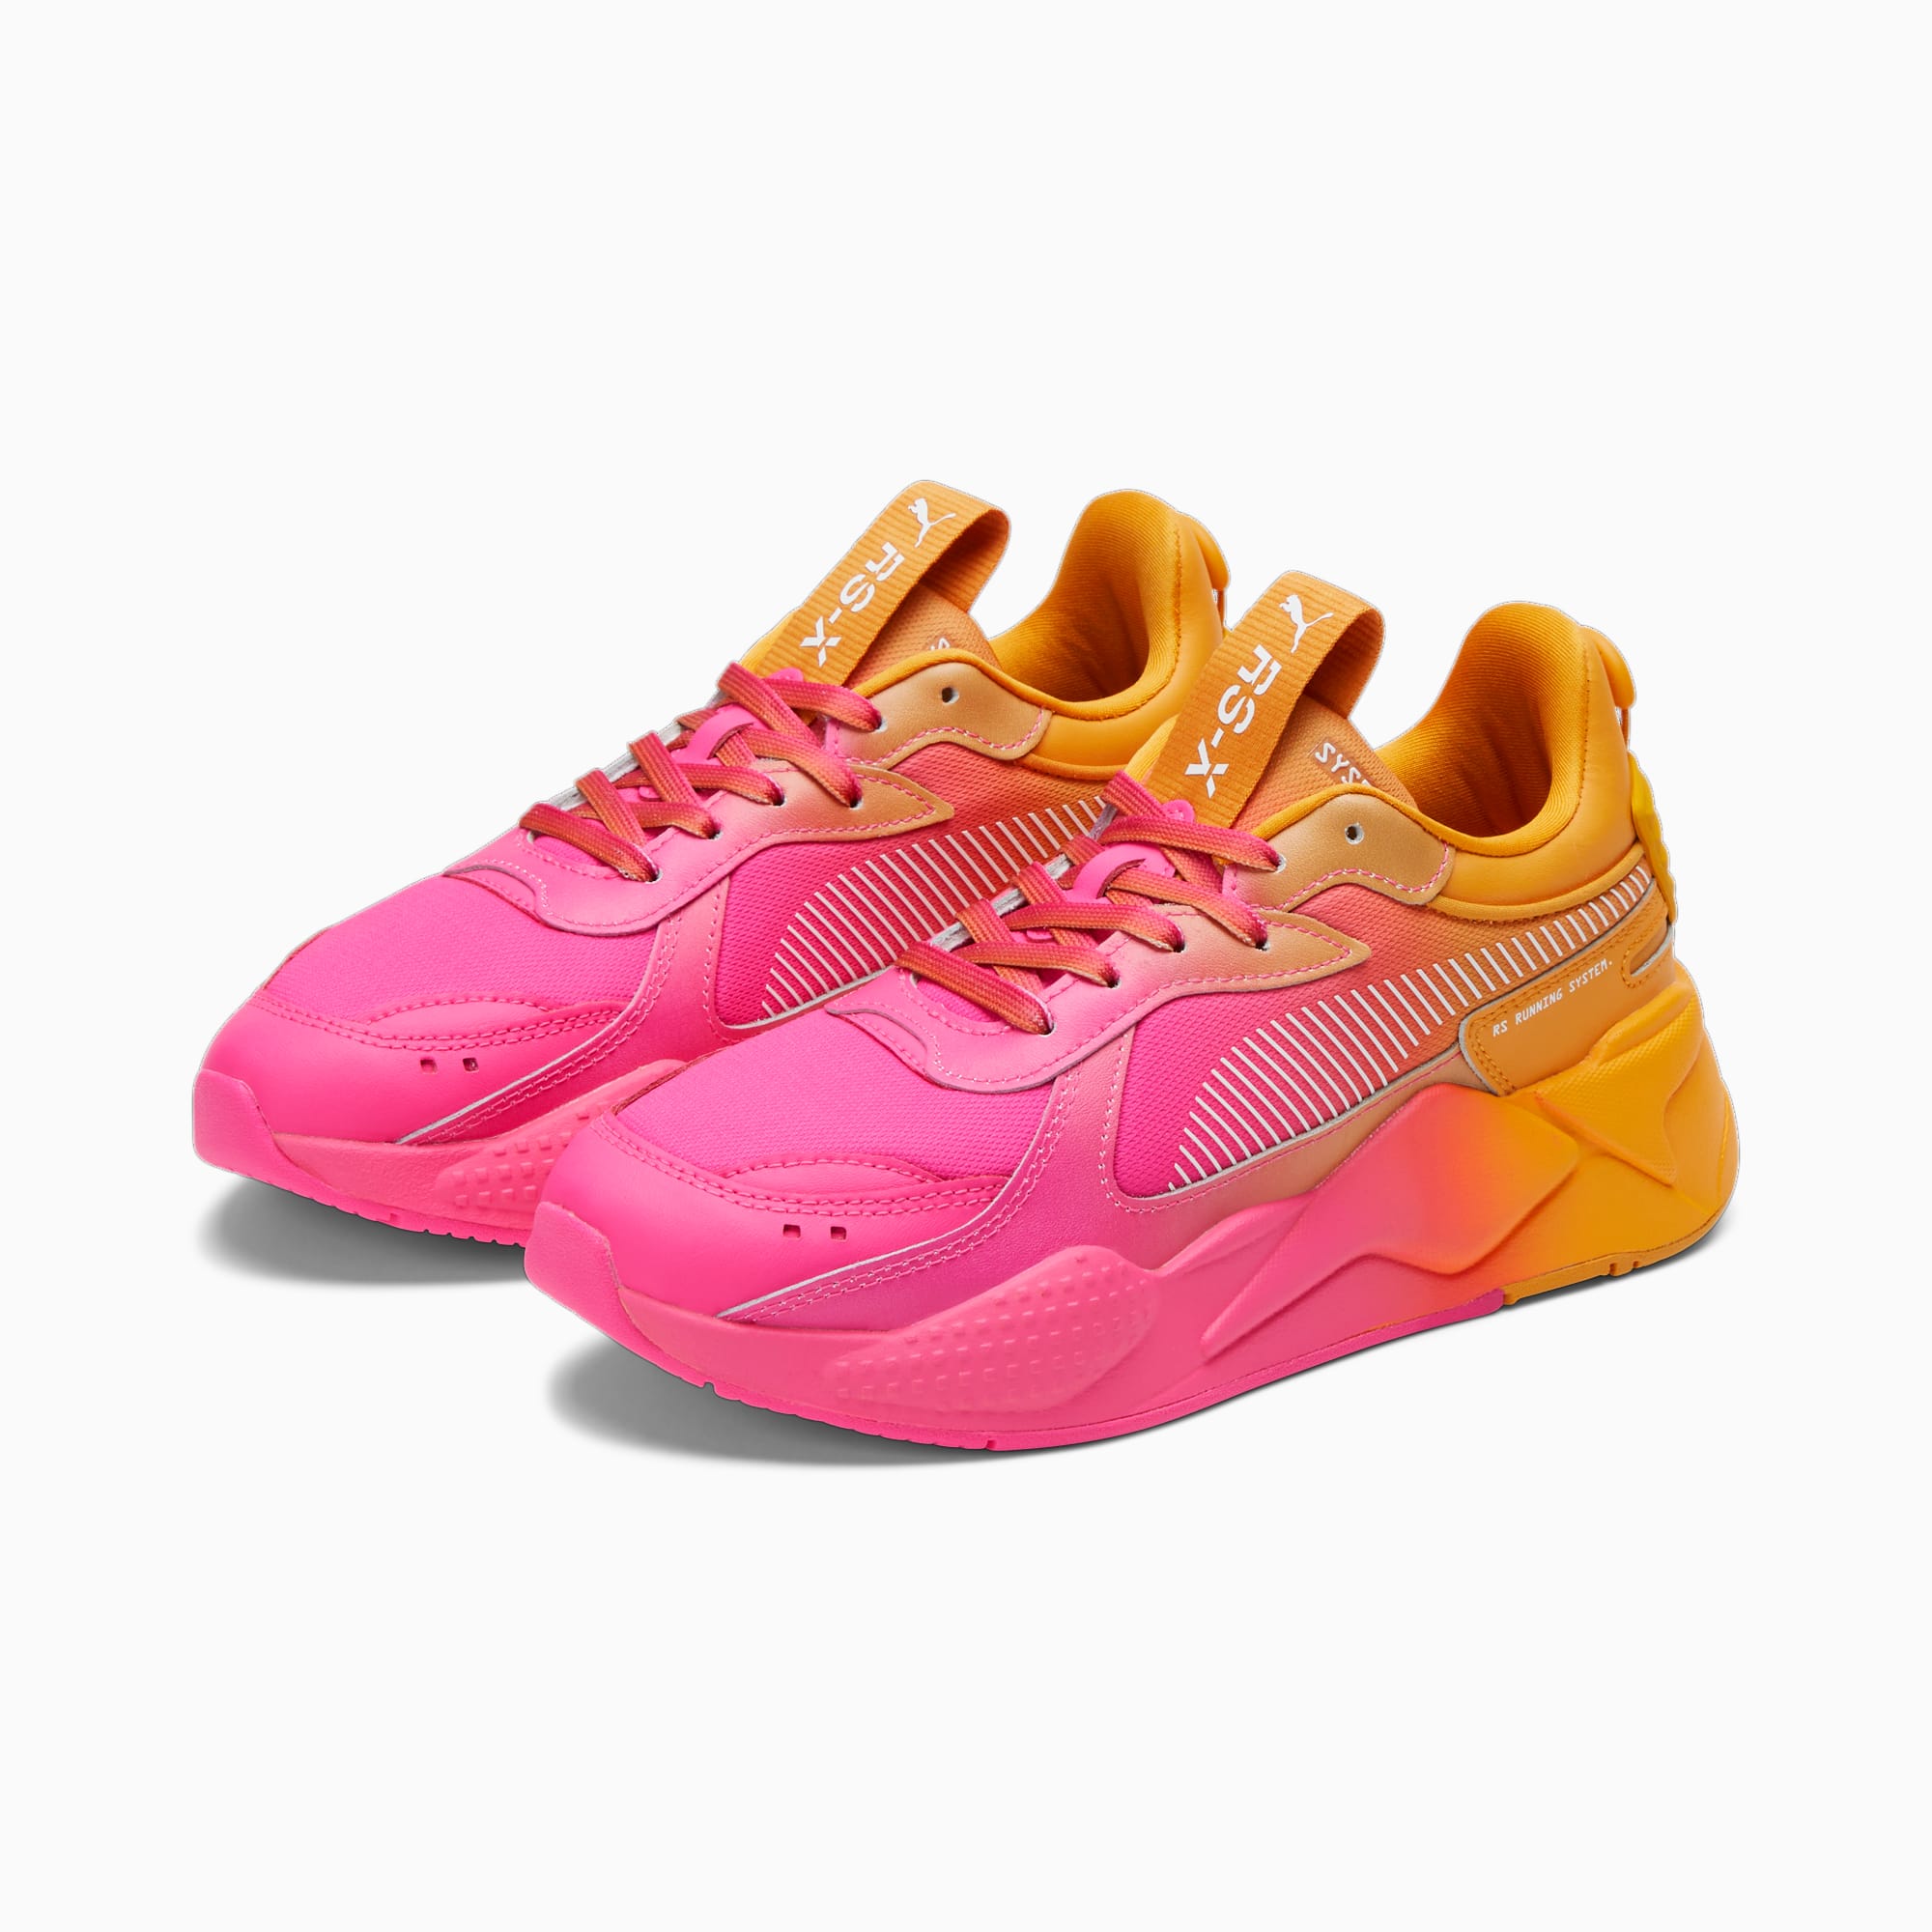 PUMA RS-X Running System Pink Orange Women’s Sneaker Shoes Size 7